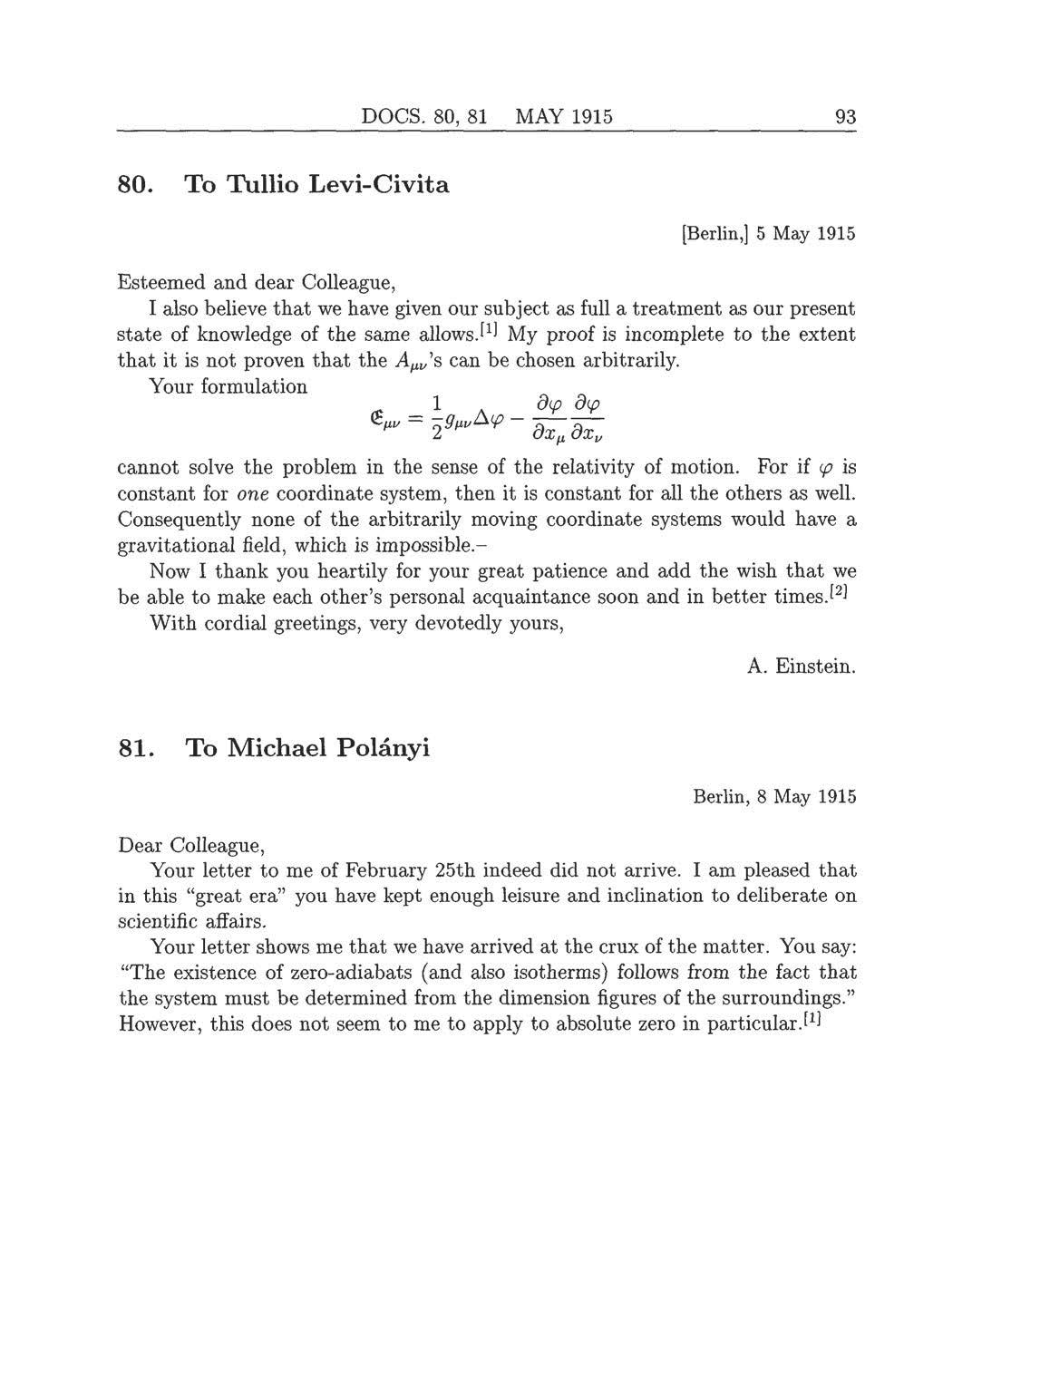 Volume 8: The Berlin Years: Correspondence, 1914-1918 (English translation supplement) page 93